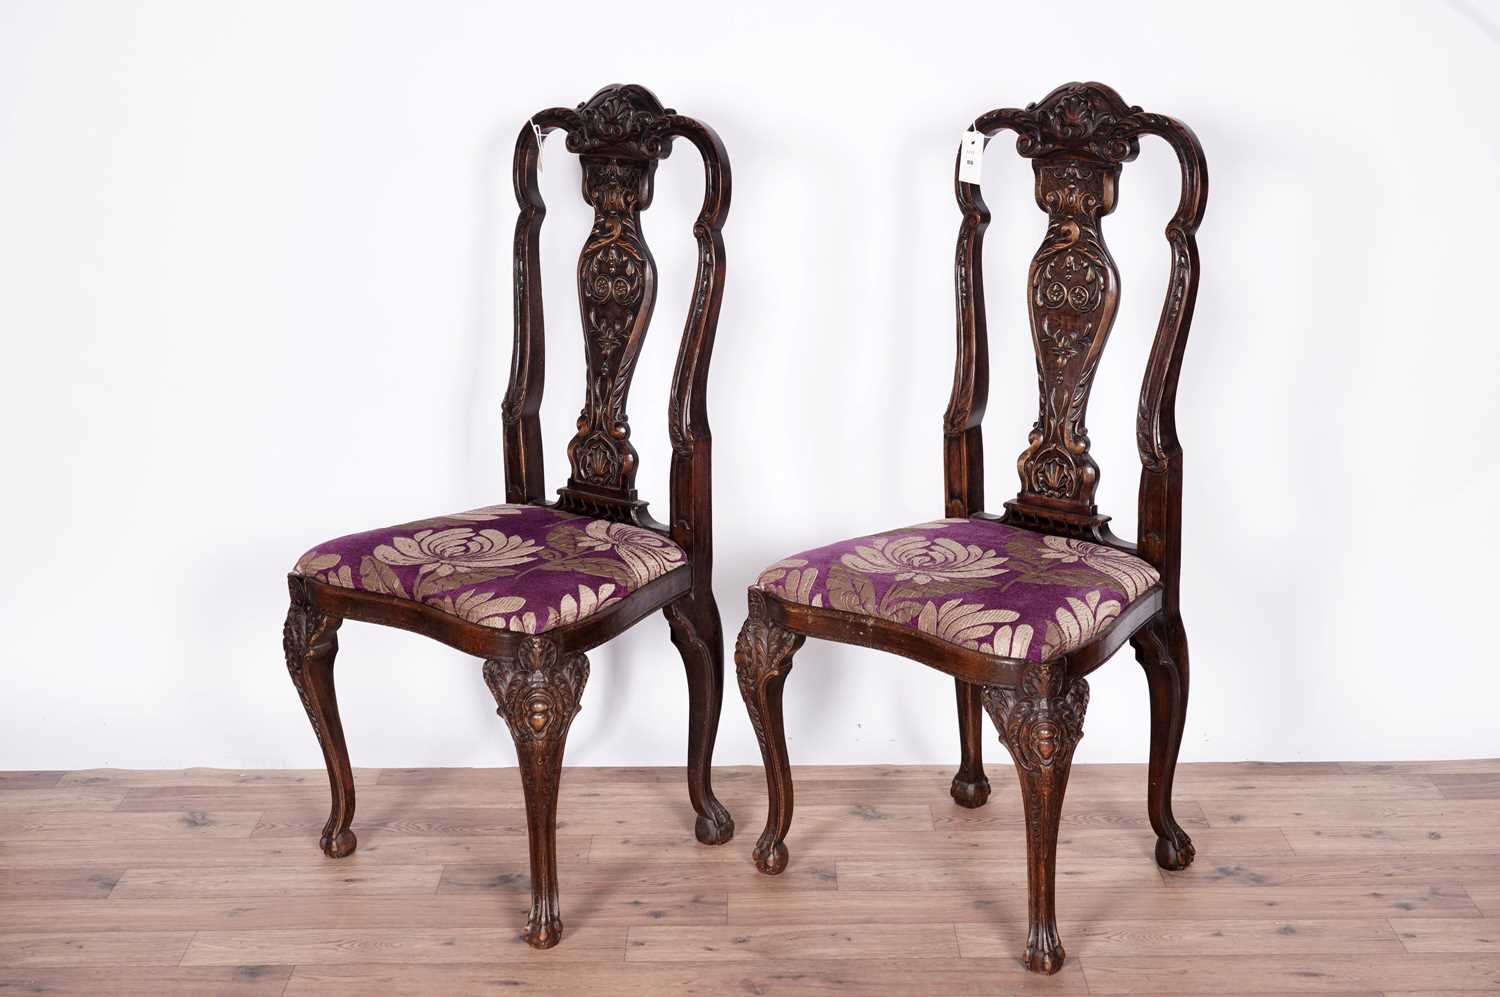 A pair of decorative mid 18th century style carved and stained beech side chairs